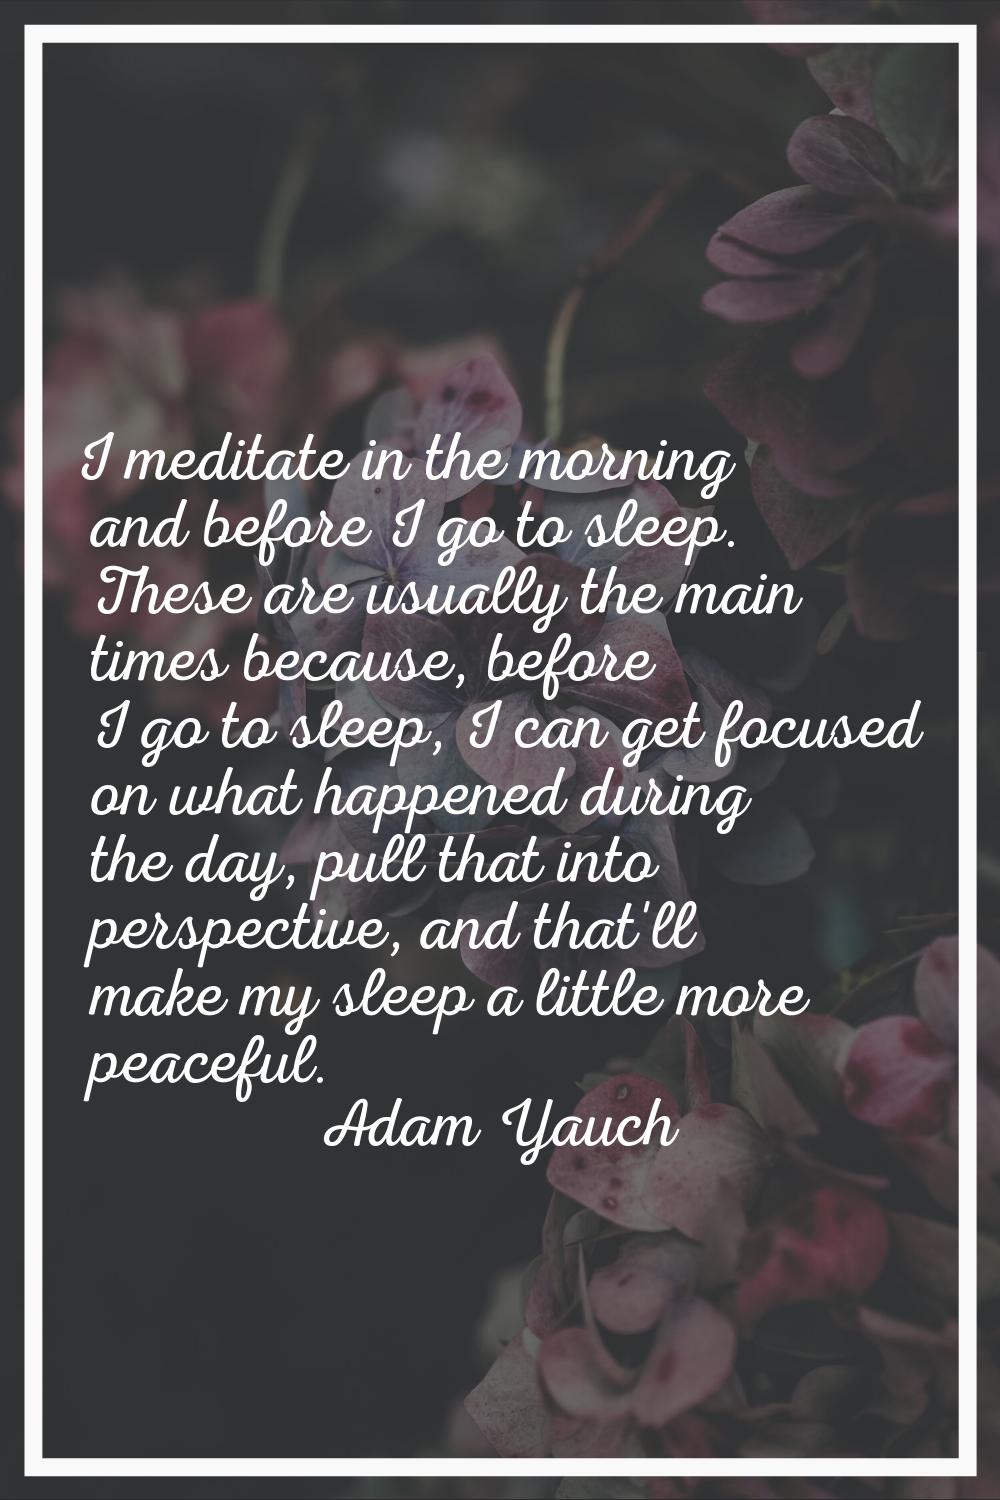 I meditate in the morning and before I go to sleep. These are usually the main times because, befor